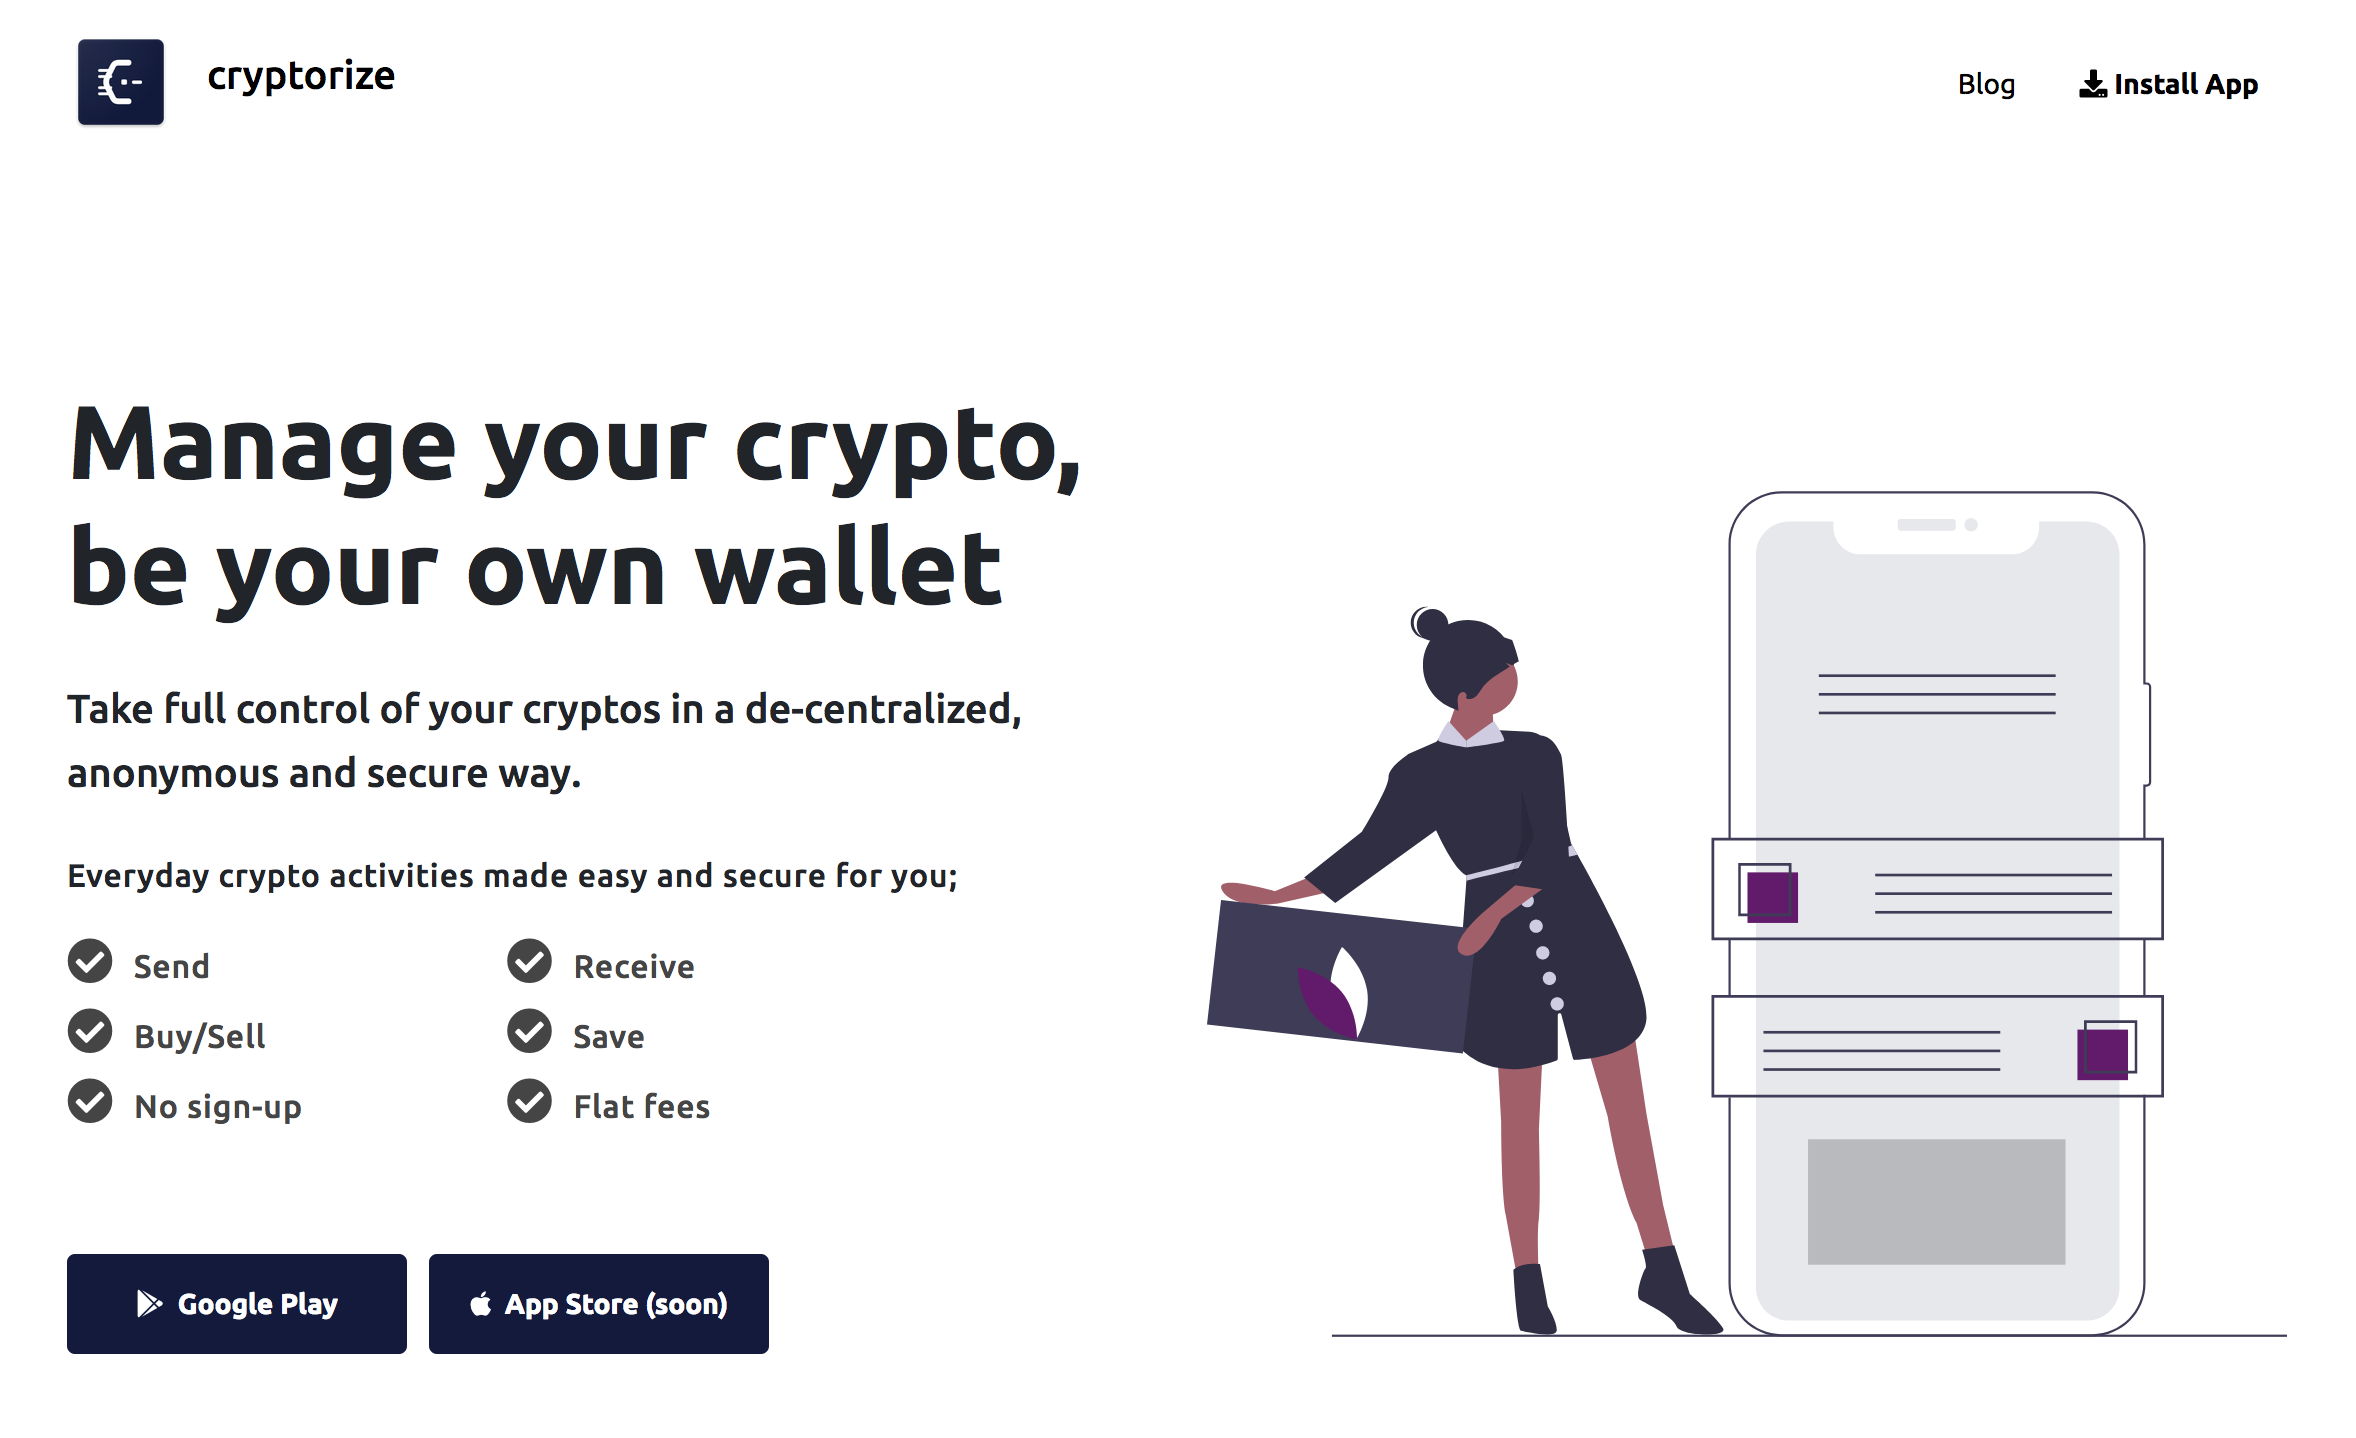 Manage your crypto securely and conveniently. Be your own wallet!